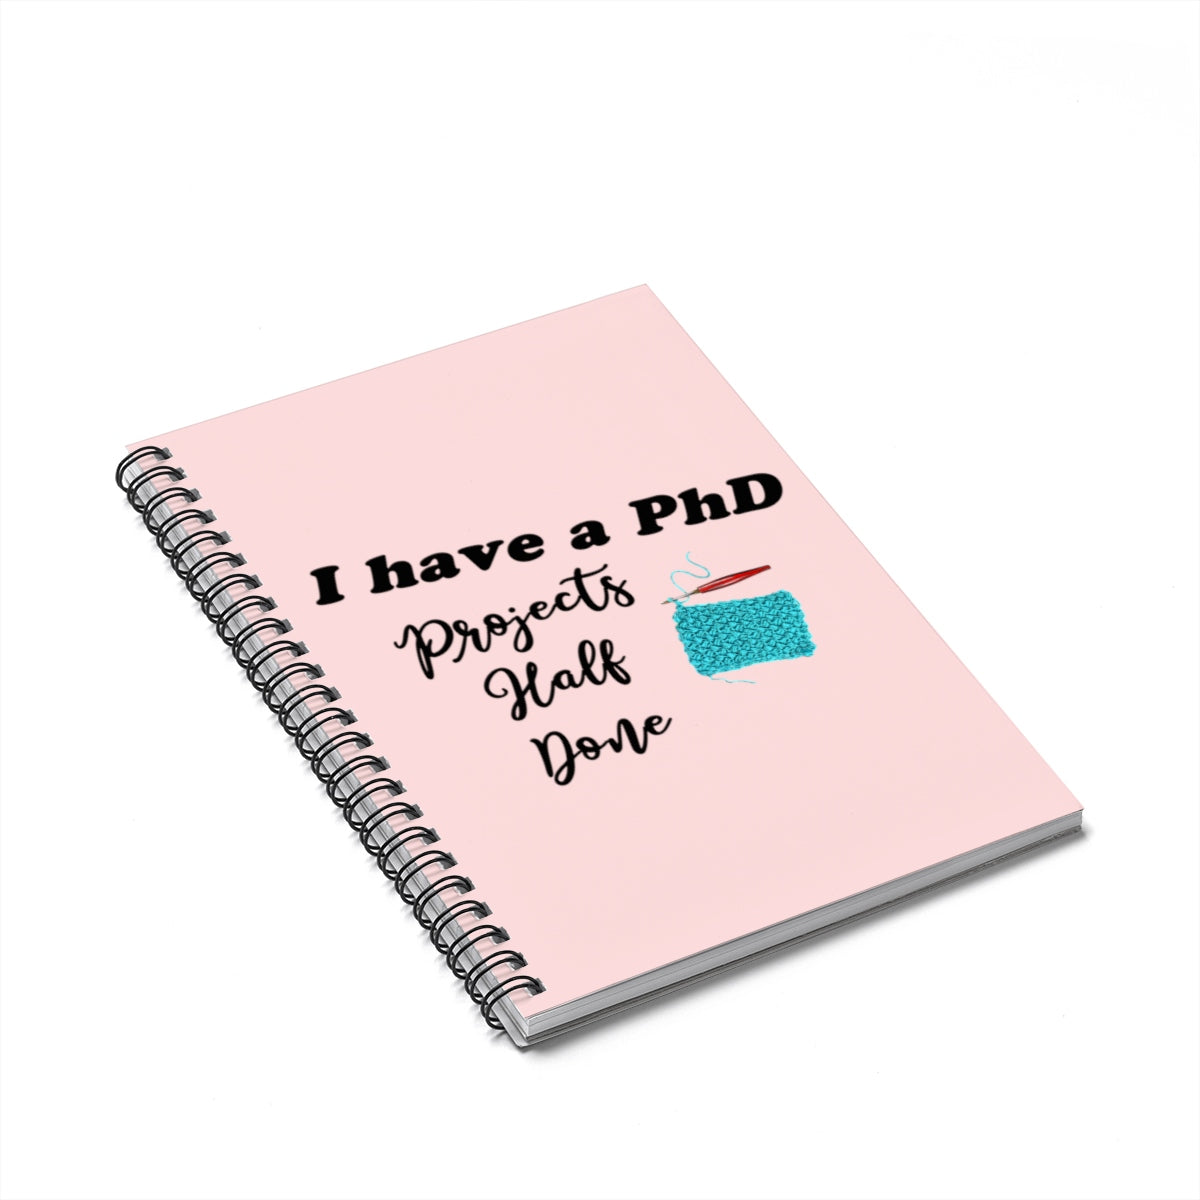 "I Have a PhD - Projects Half Done" Black Letters - Spiral Notebook - Ruled Line